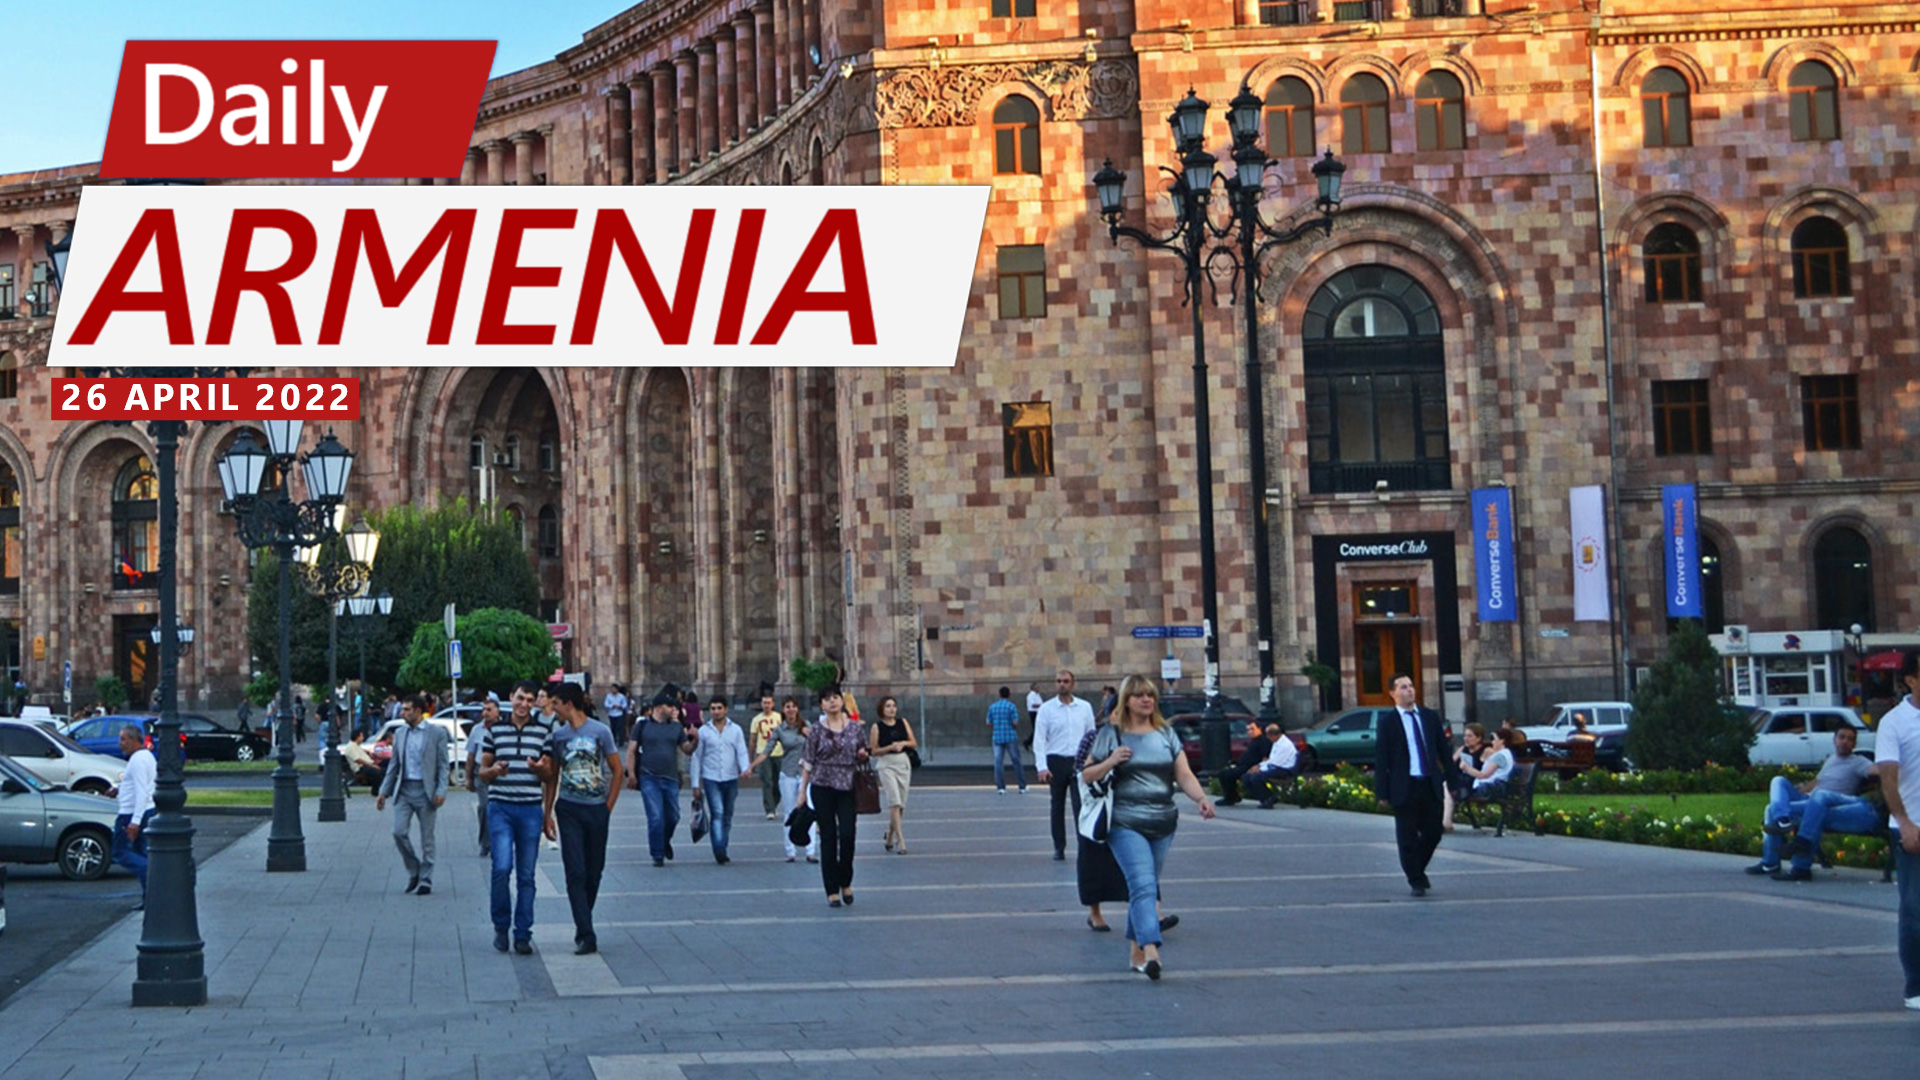 Economic activity in Armenia increased by 9.6%